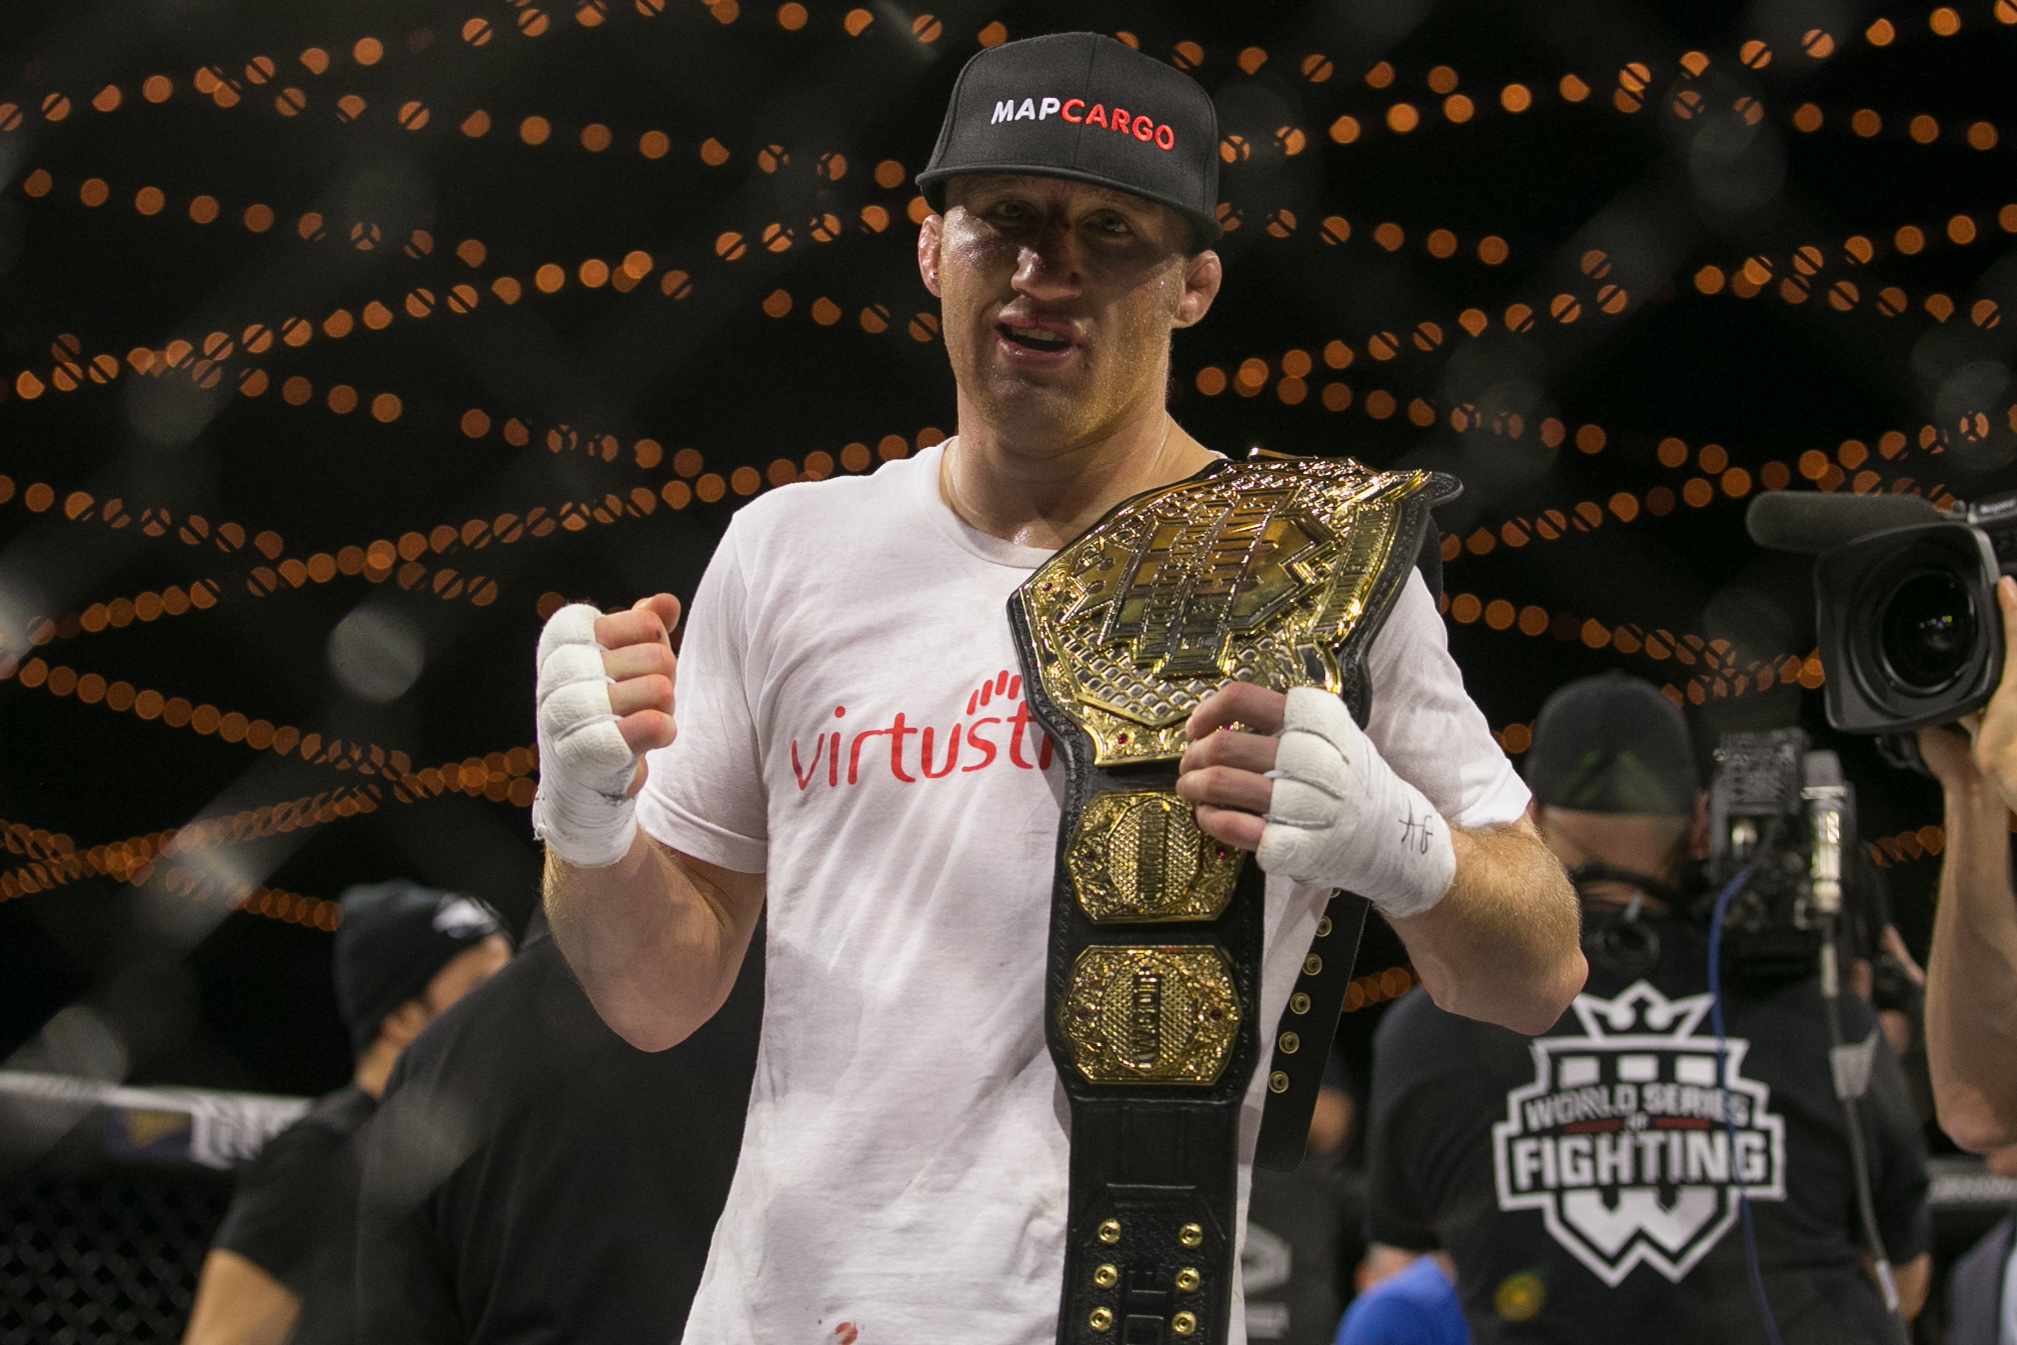 Justin Gaethje is one of the top stars in the UFC presently and has amassed a large net worth thanks to his record